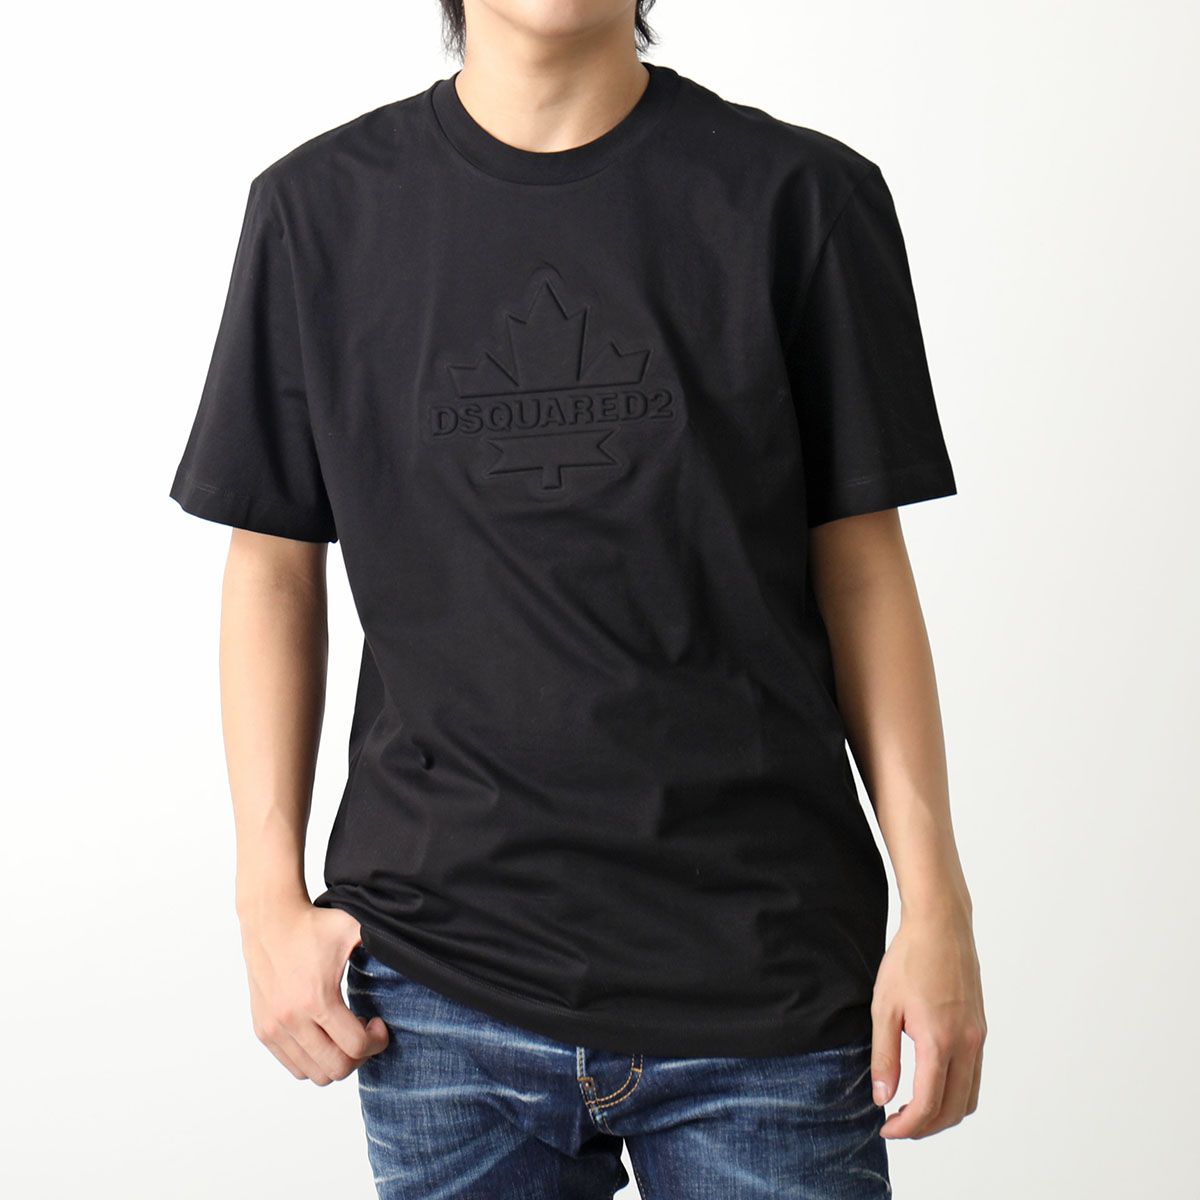 DSQUARED2 ディースクエアード Tシャツ LEAF SKATER T S74GD1231 S...